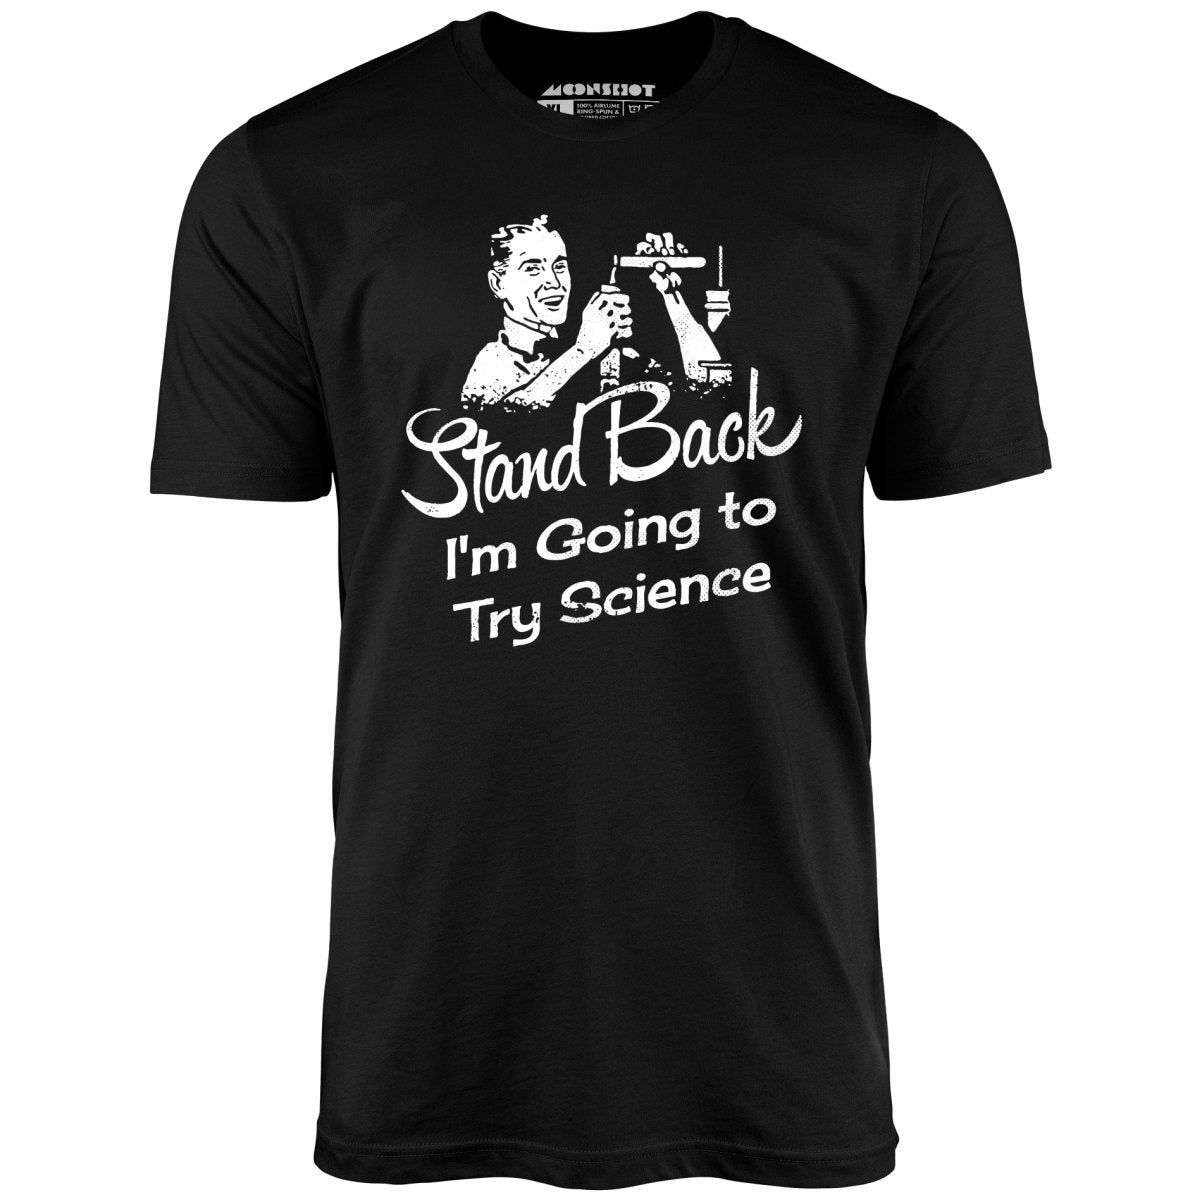 Stand Back I'm Going to Try Science - Unisex T-Shirt